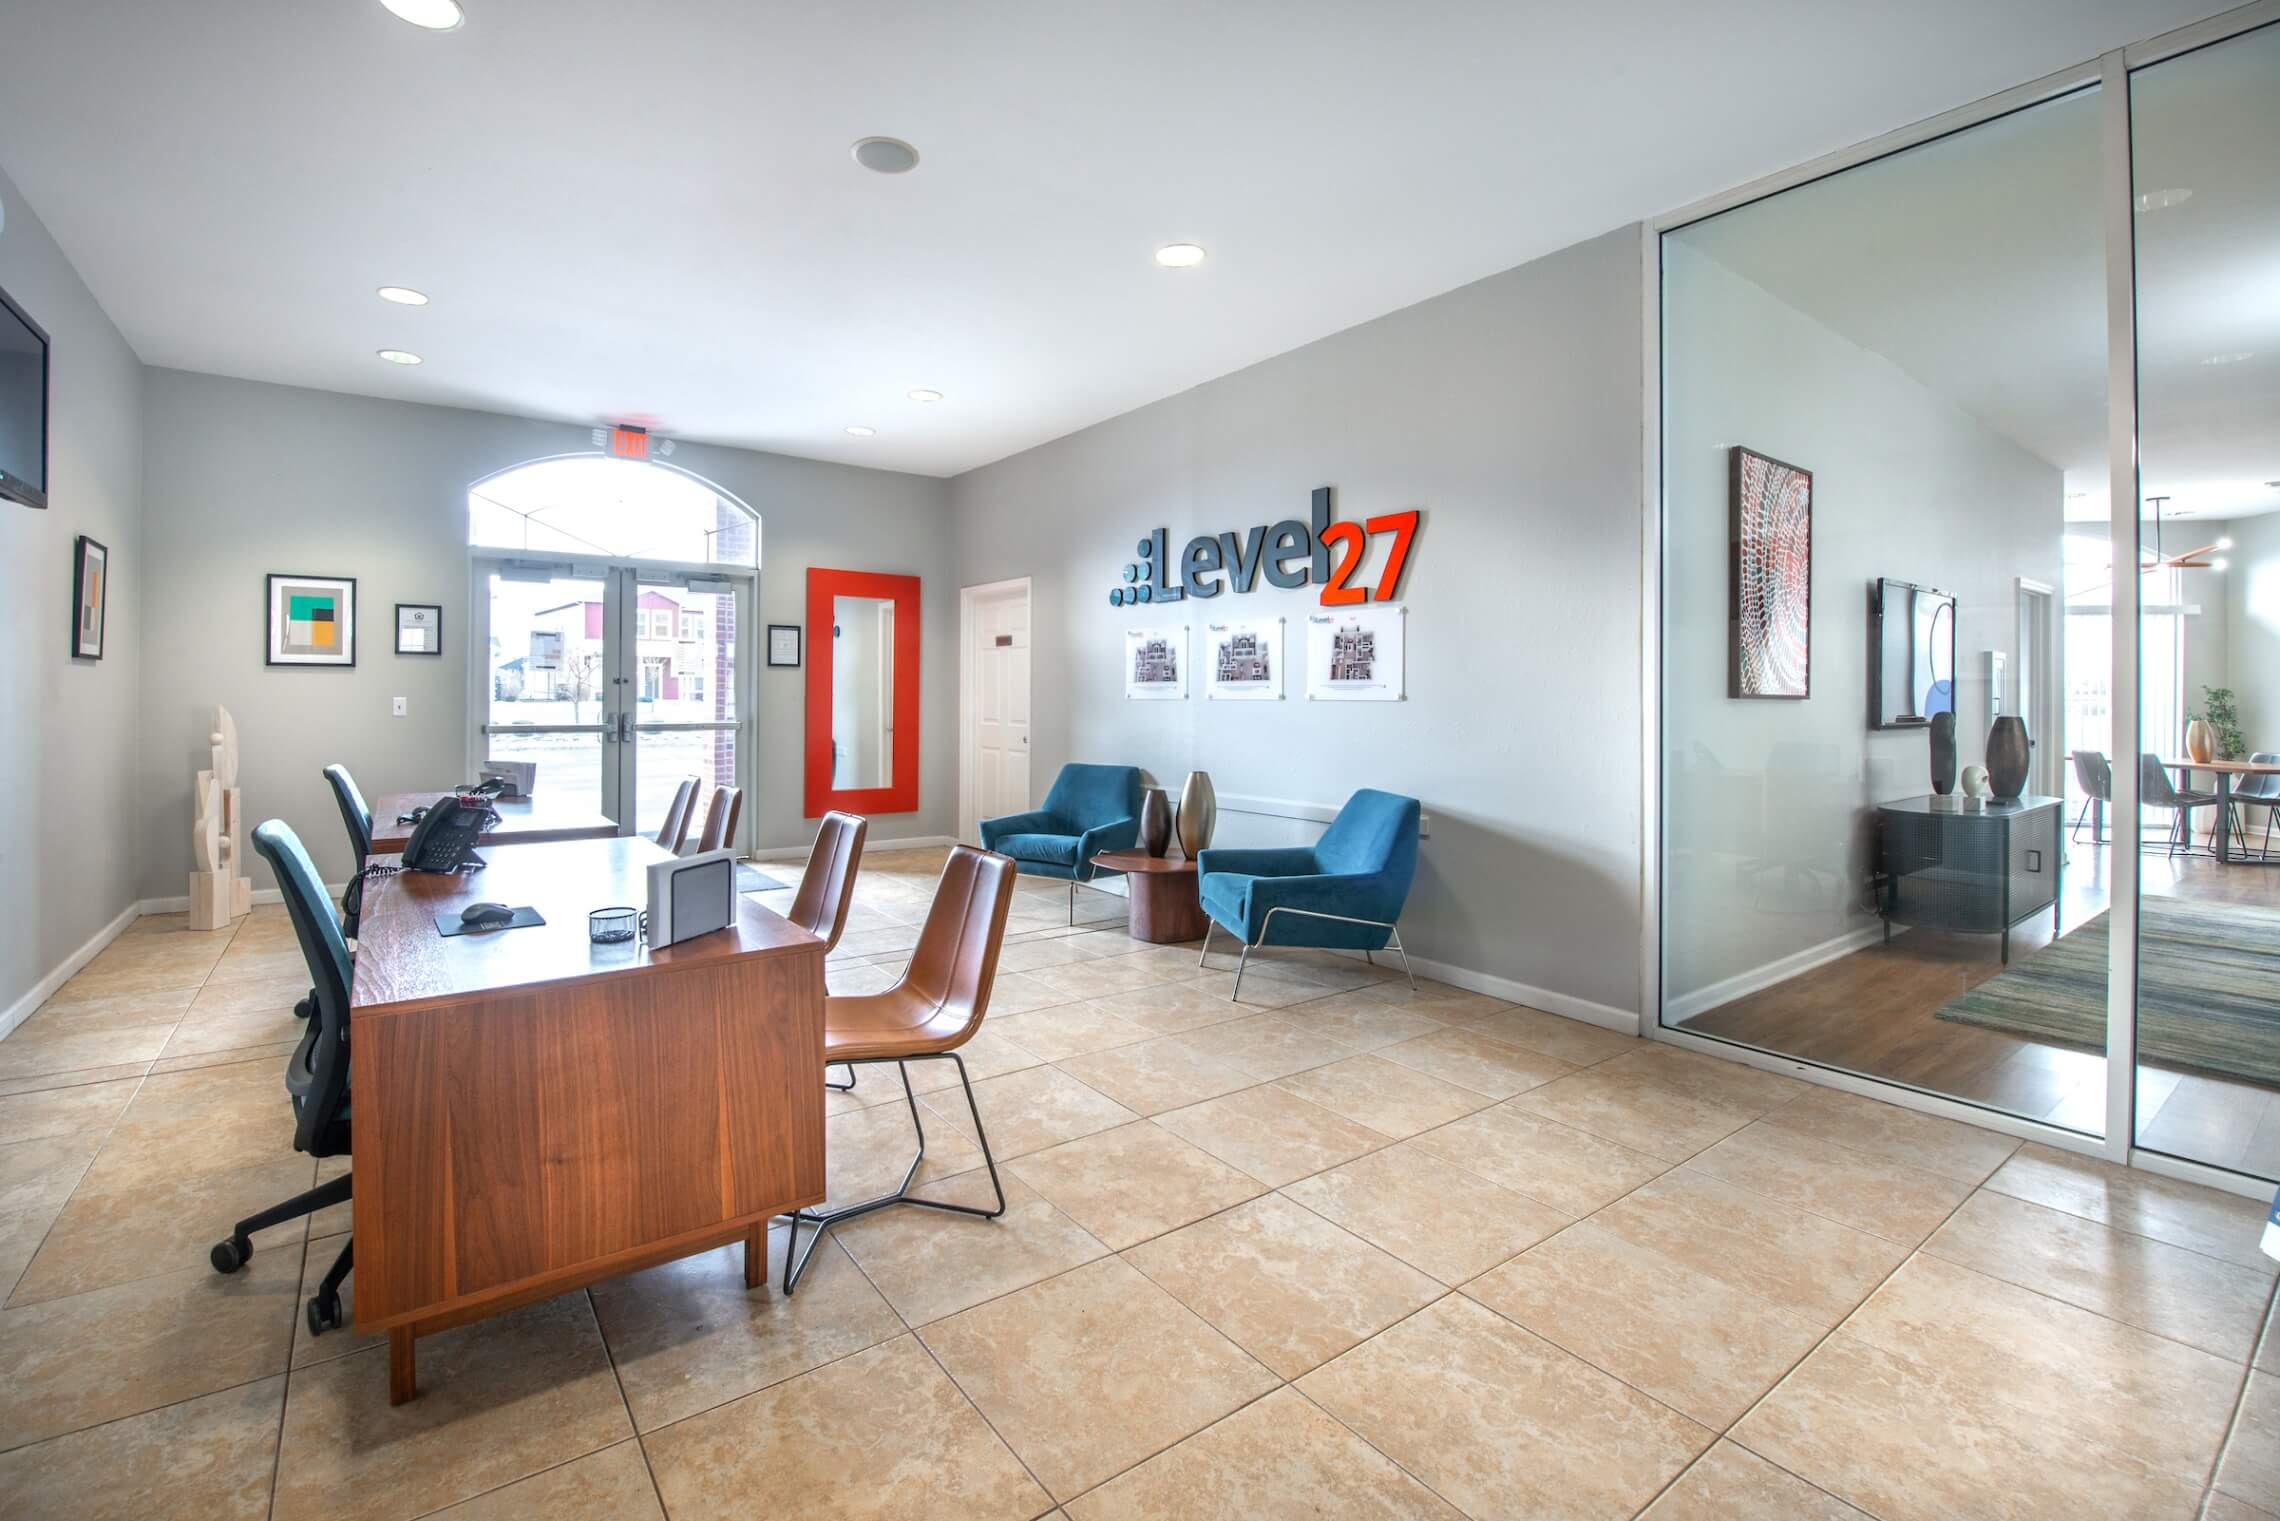 Leasing office reception desk with lounge chairs